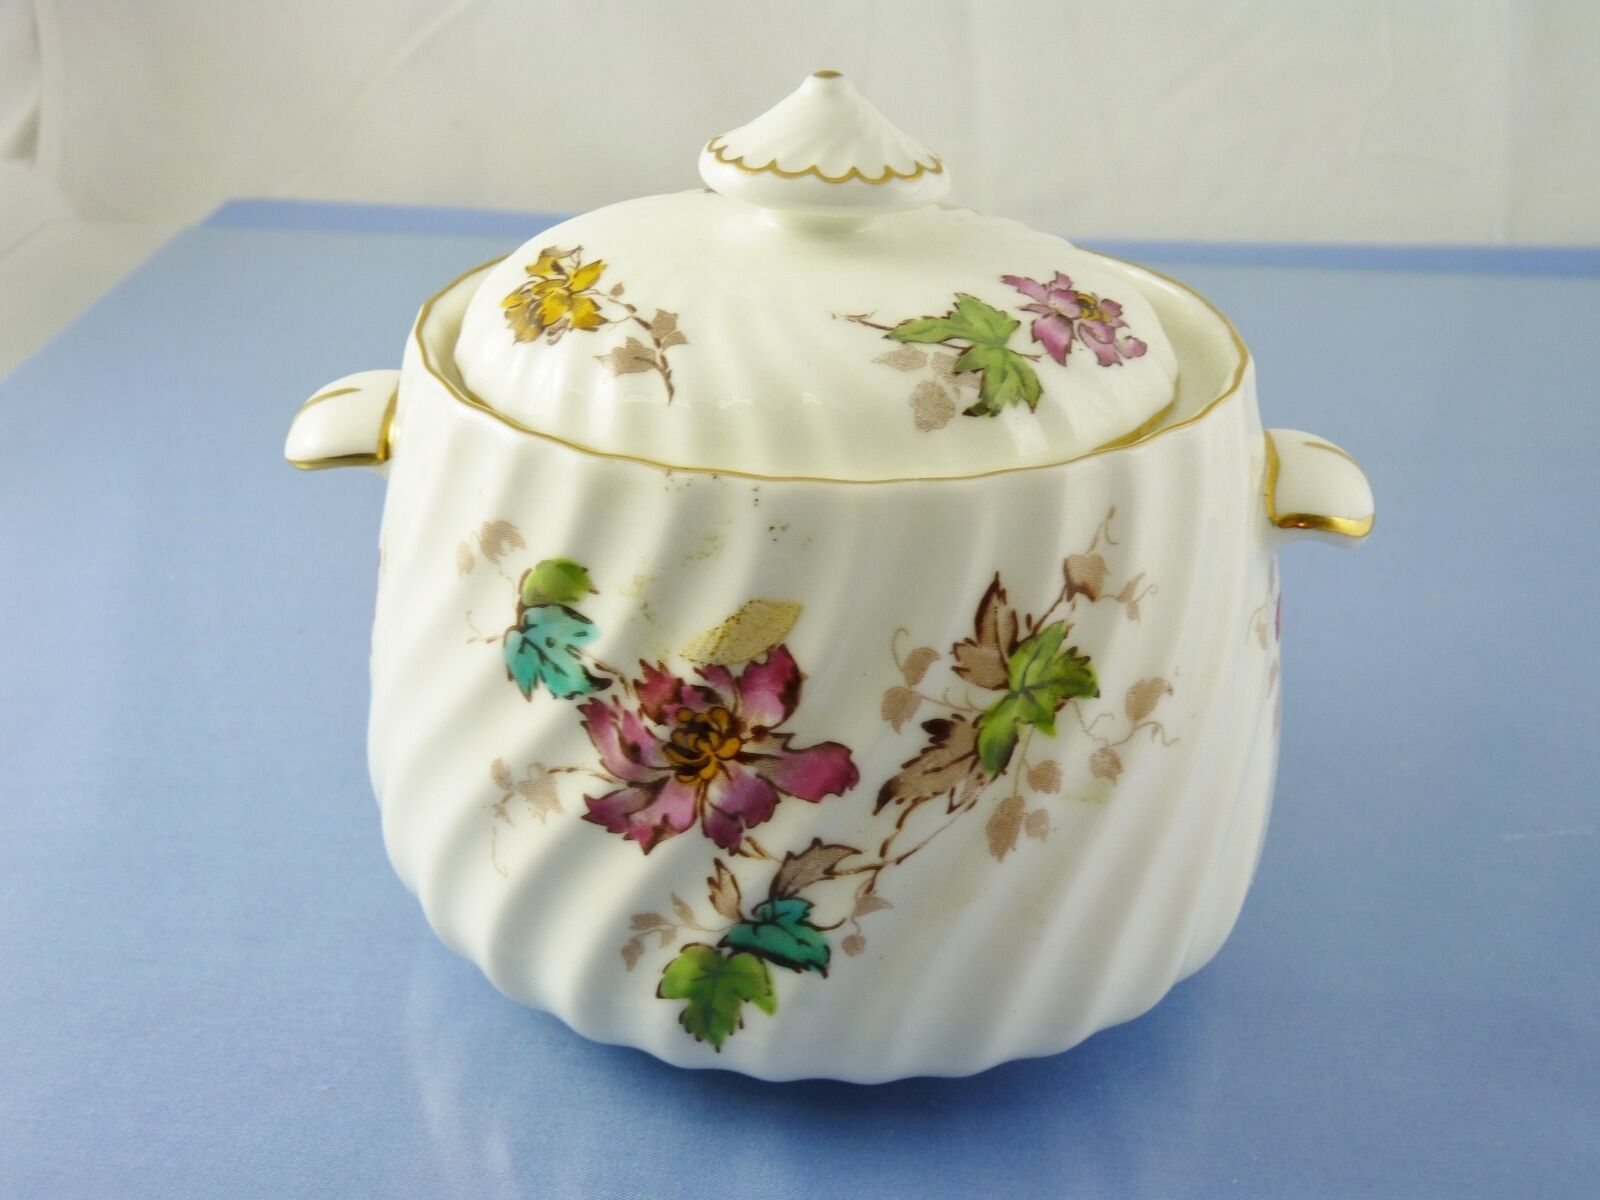 VERMONT S-365 SUGAR BOWL with LID BY MINTON CHINA